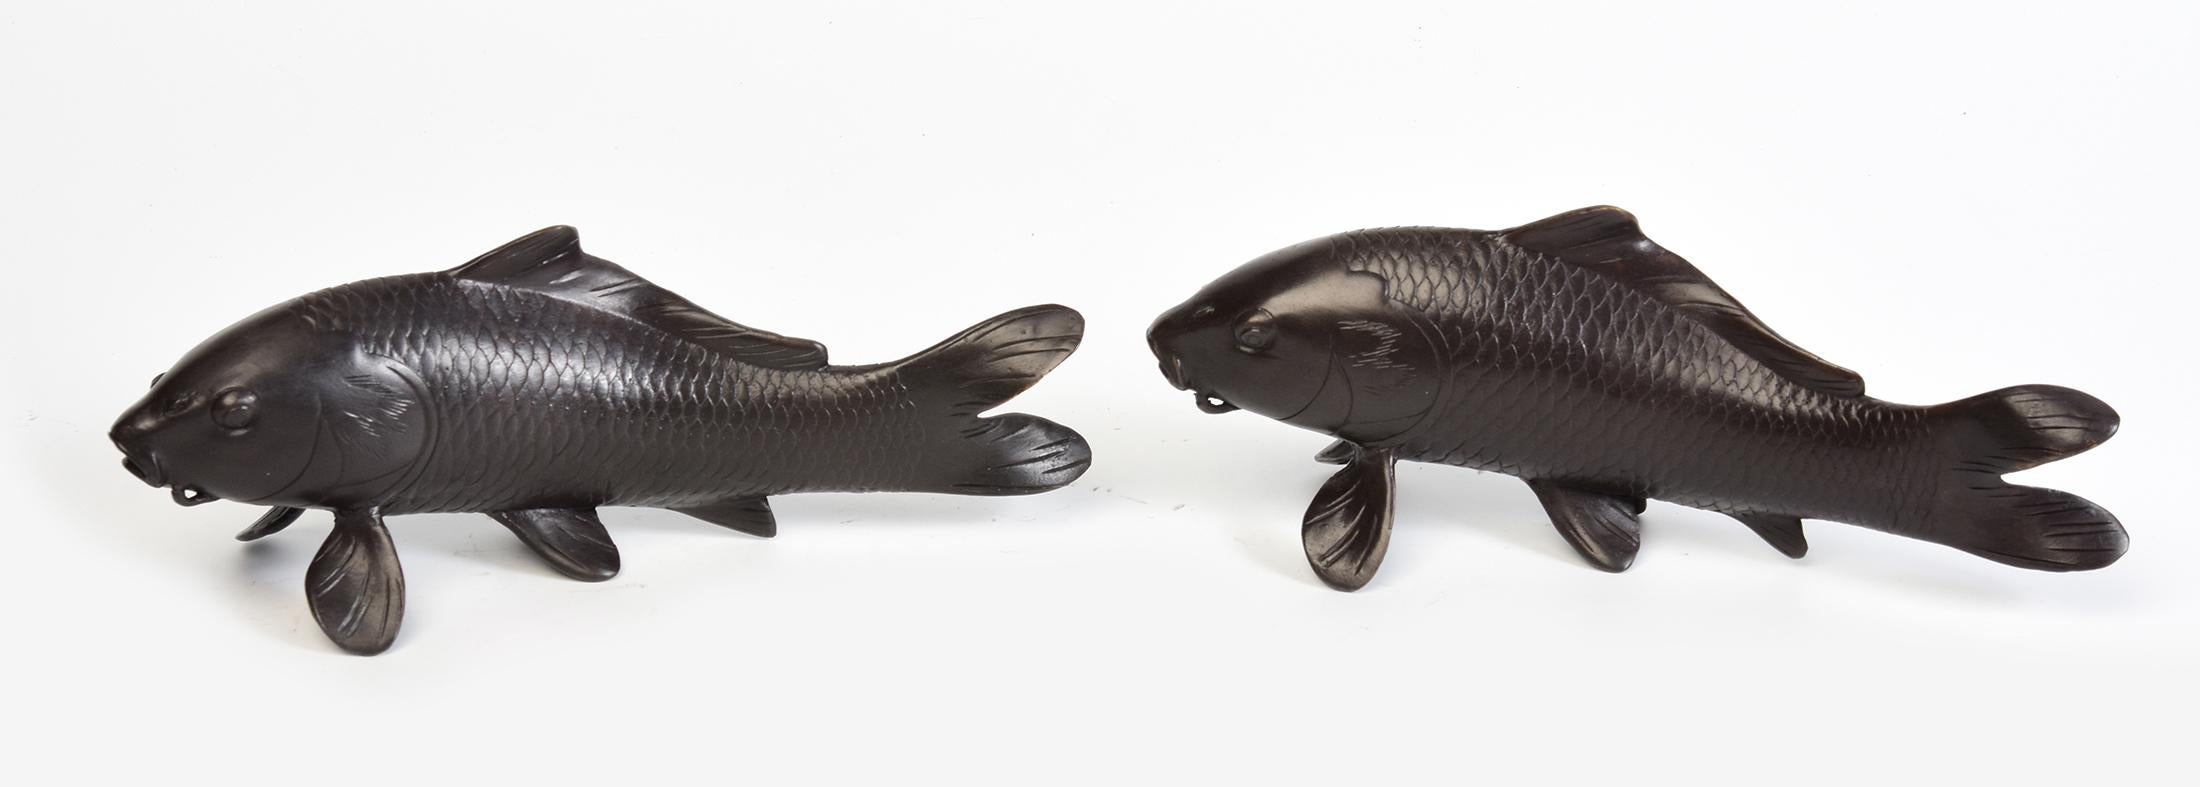 A pair of finely cast Asian bronze fish animal statues.

Age: Contemporary
Size: Length 24.4 C.M.  / Width 8 C.M. / Height 9.5 C.M.
Condition: Nice condition overall.